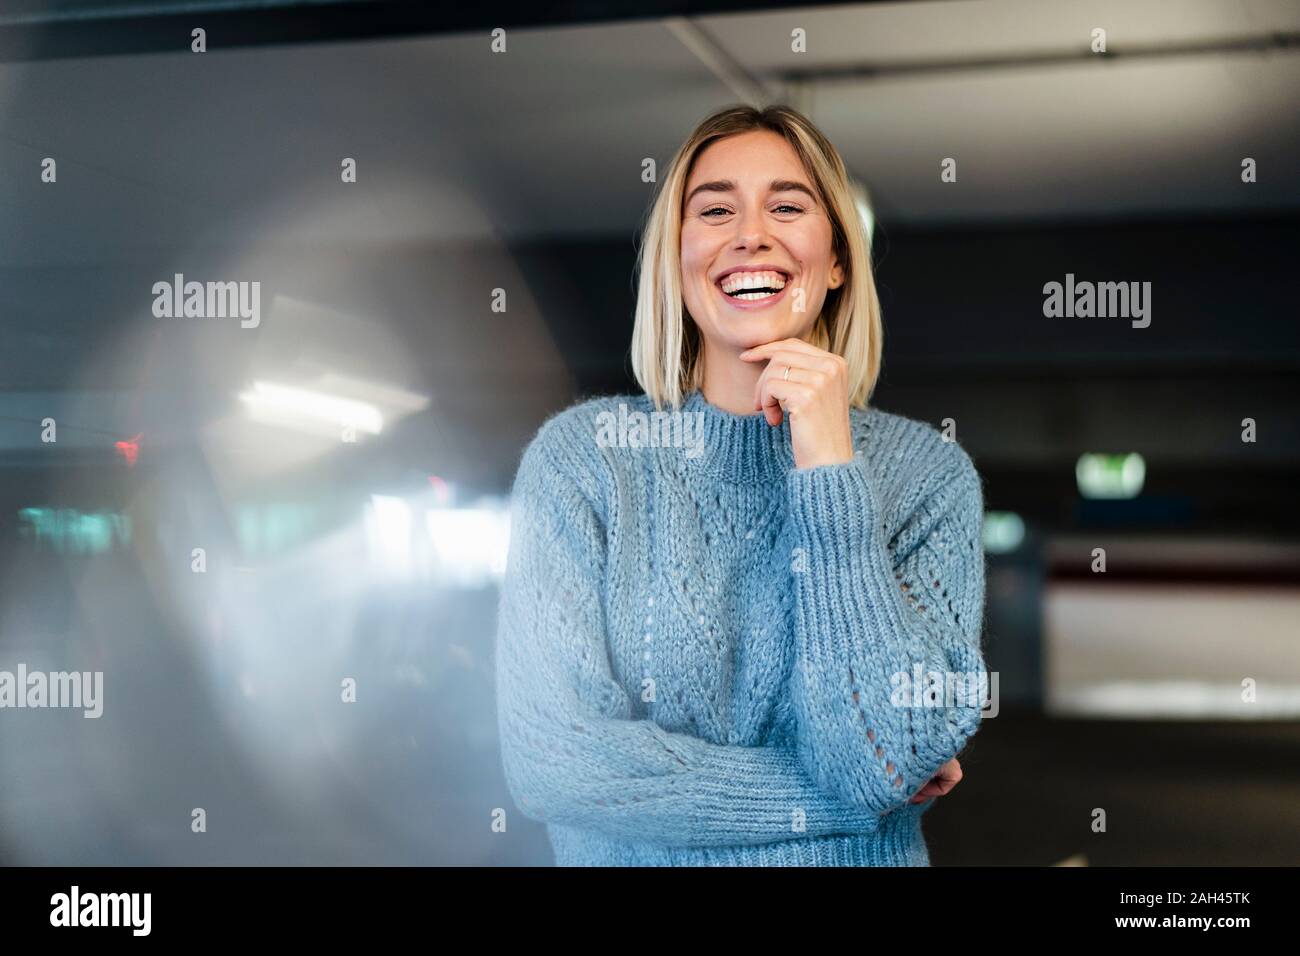 Portrait of a laughing young woman in a parking garage Stock Photo